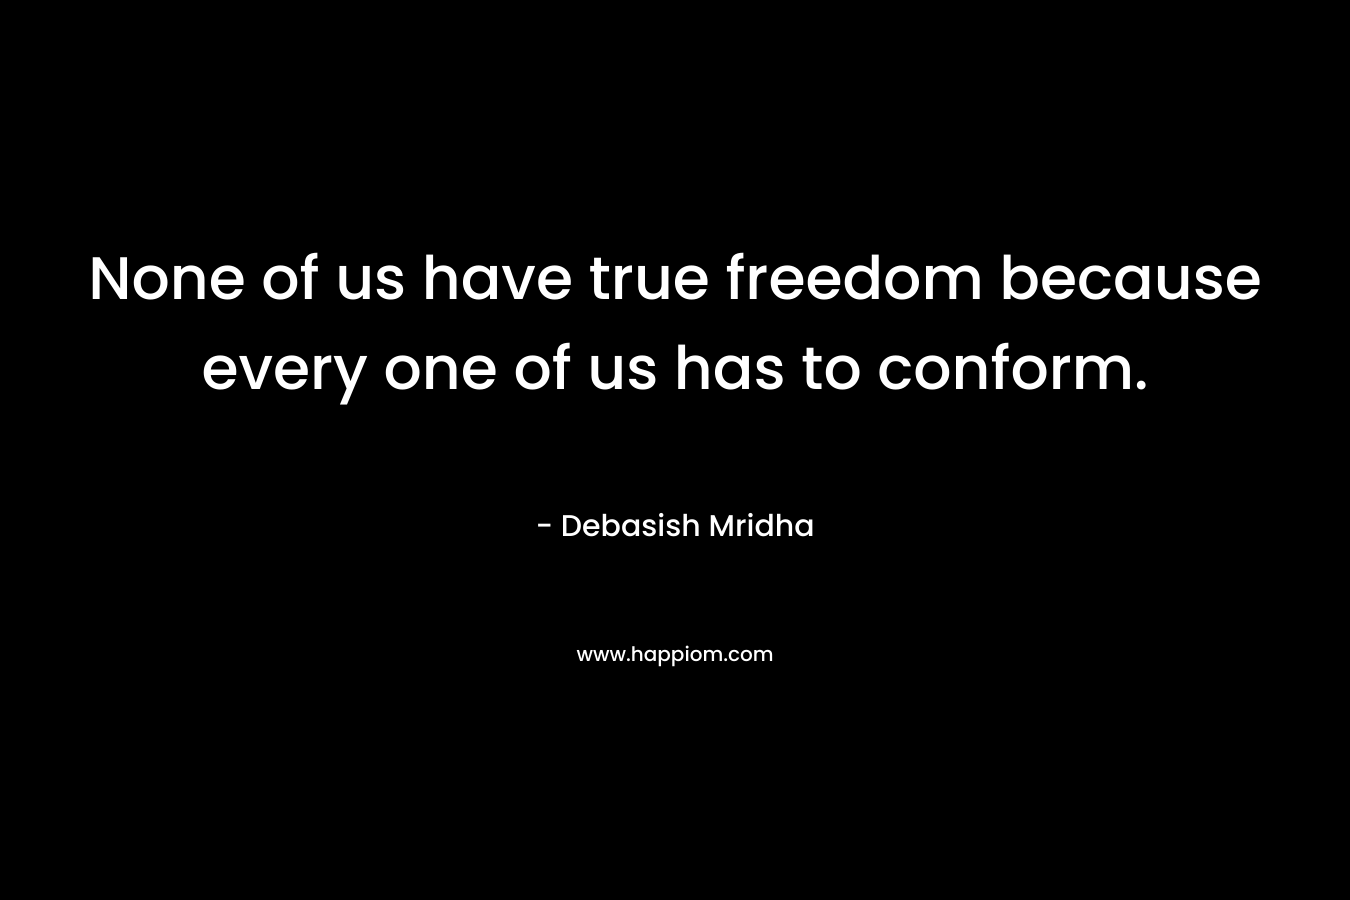 None of us have true freedom because every one of us has to conform.